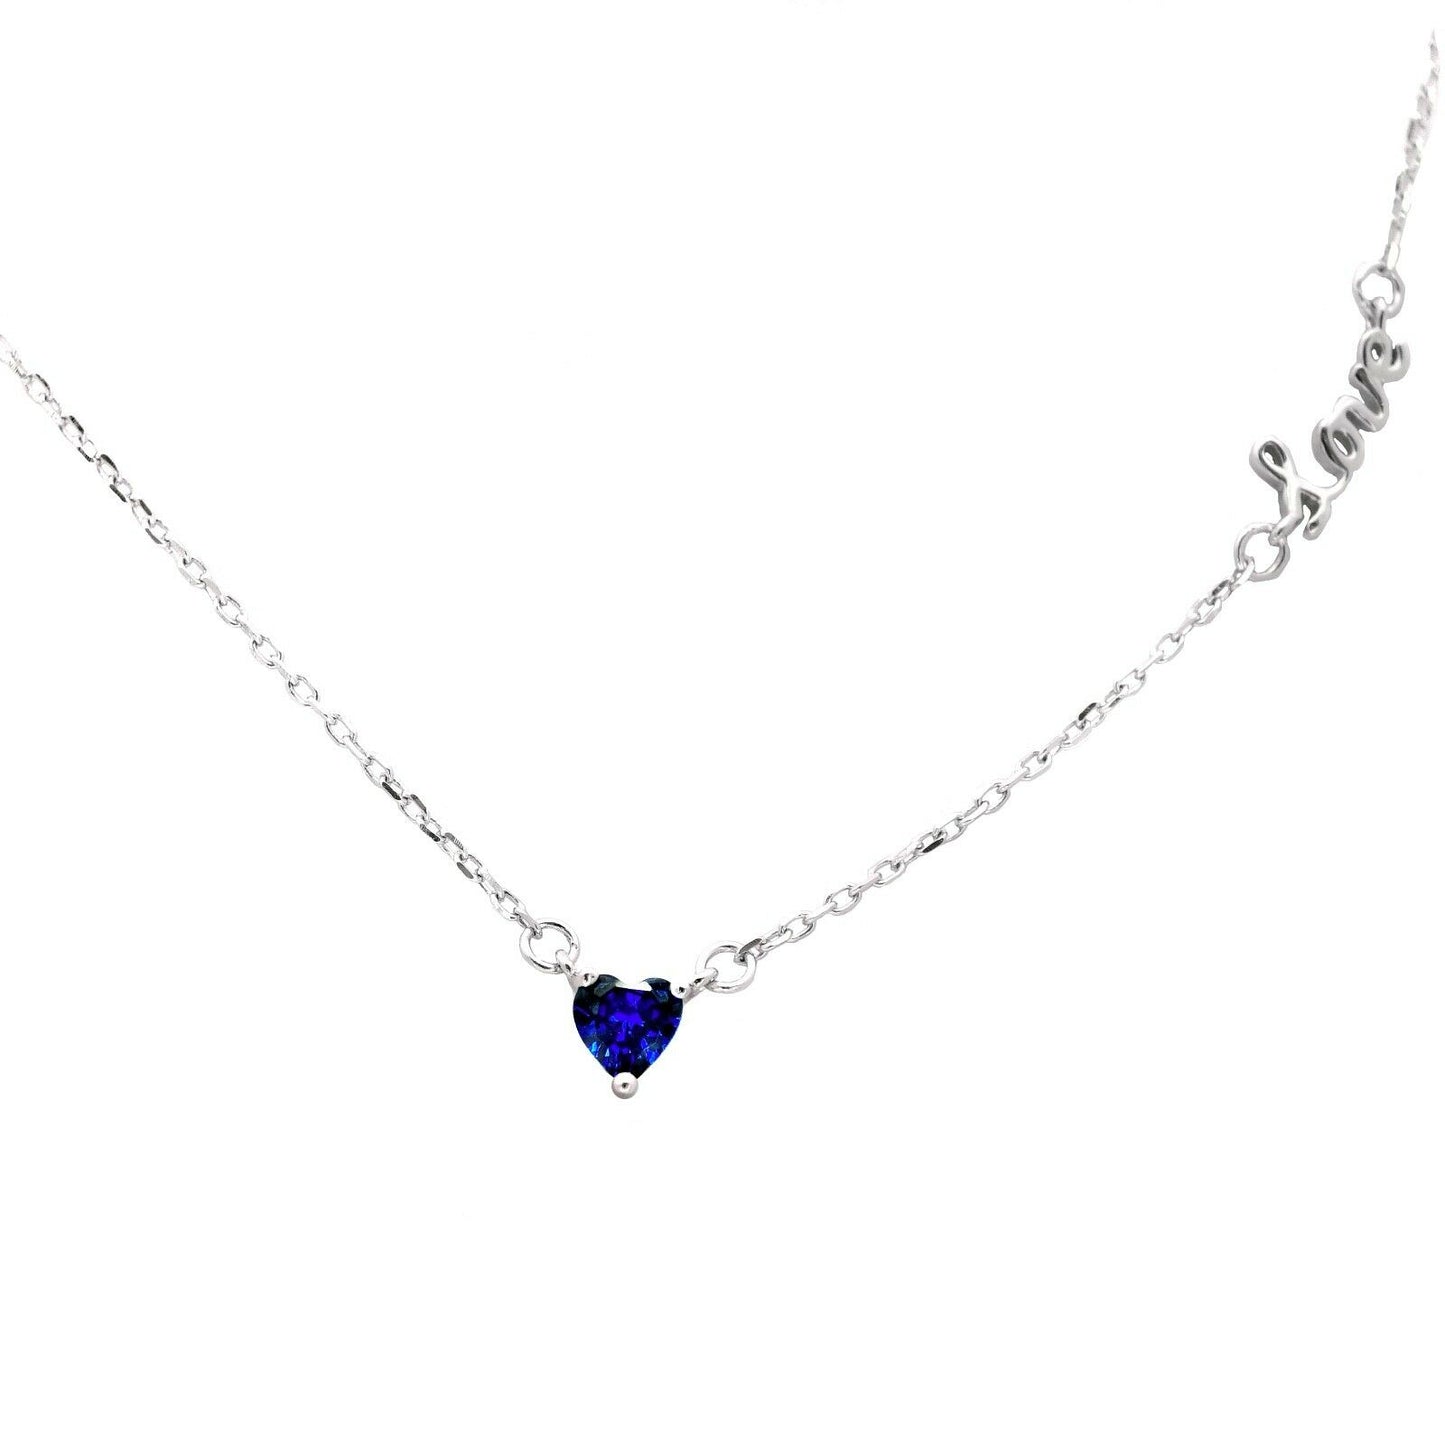 UK Solid 925 Silver Love Blue Cubic Zirconia Heart Pendant Necklace in Gift Bag